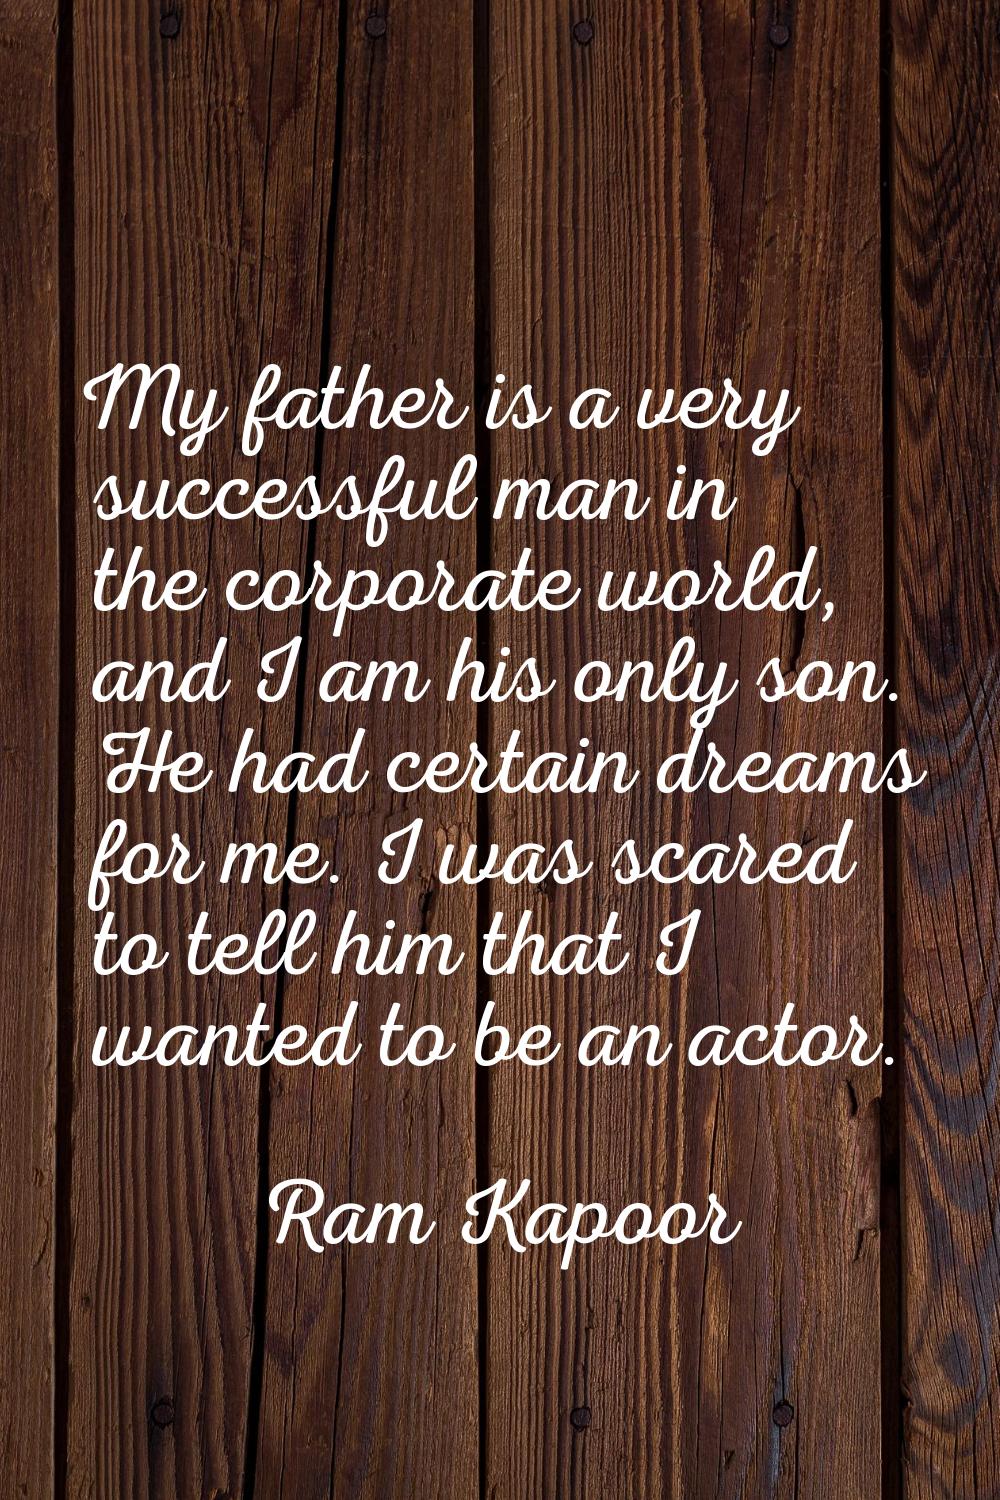 My father is a very successful man in the corporate world, and I am his only son. He had certain dr